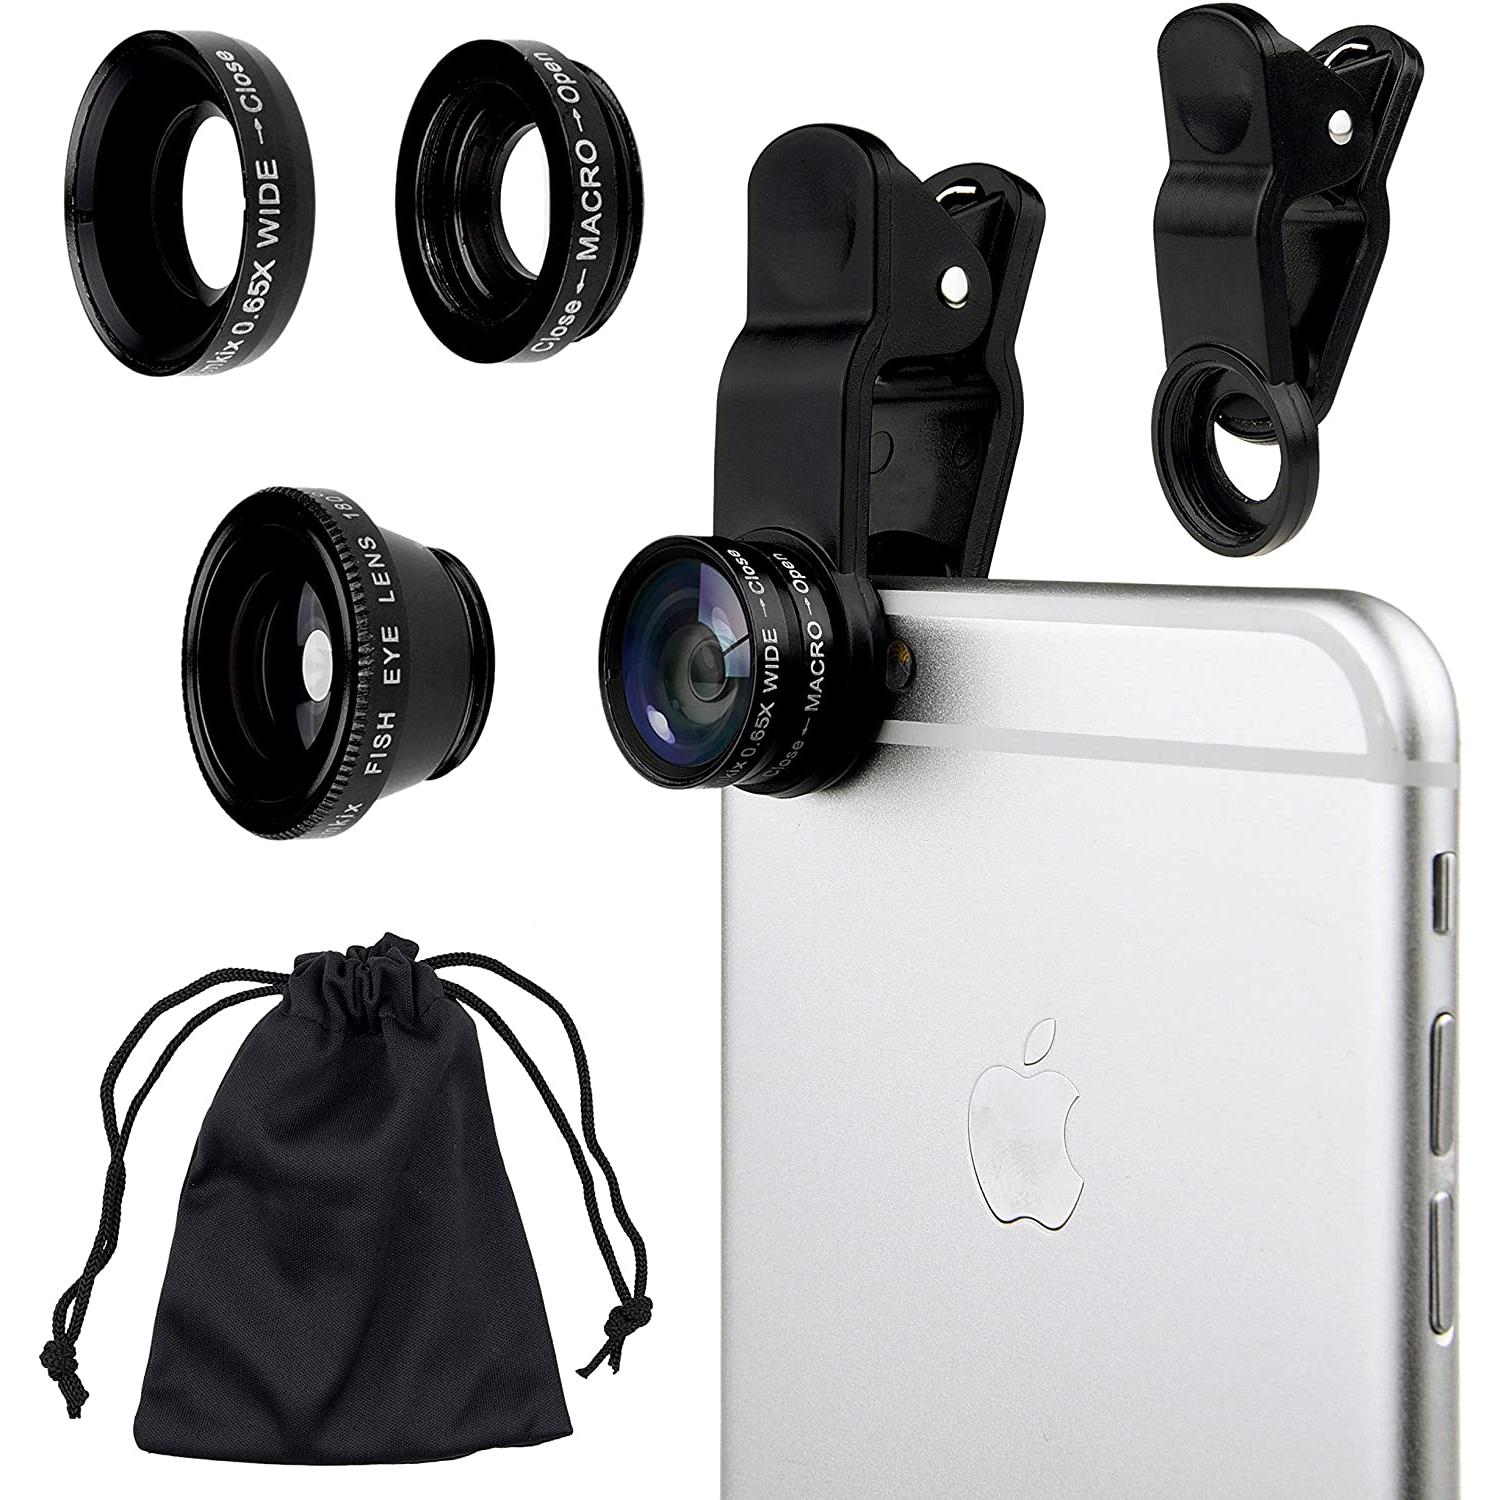 Camkix Universal 3 in 1 Cell Phone Camera Lens Kit - Fish Eye Lens / 2 in 1 Macro Lens & Wide Angle Lens/Universal Clip